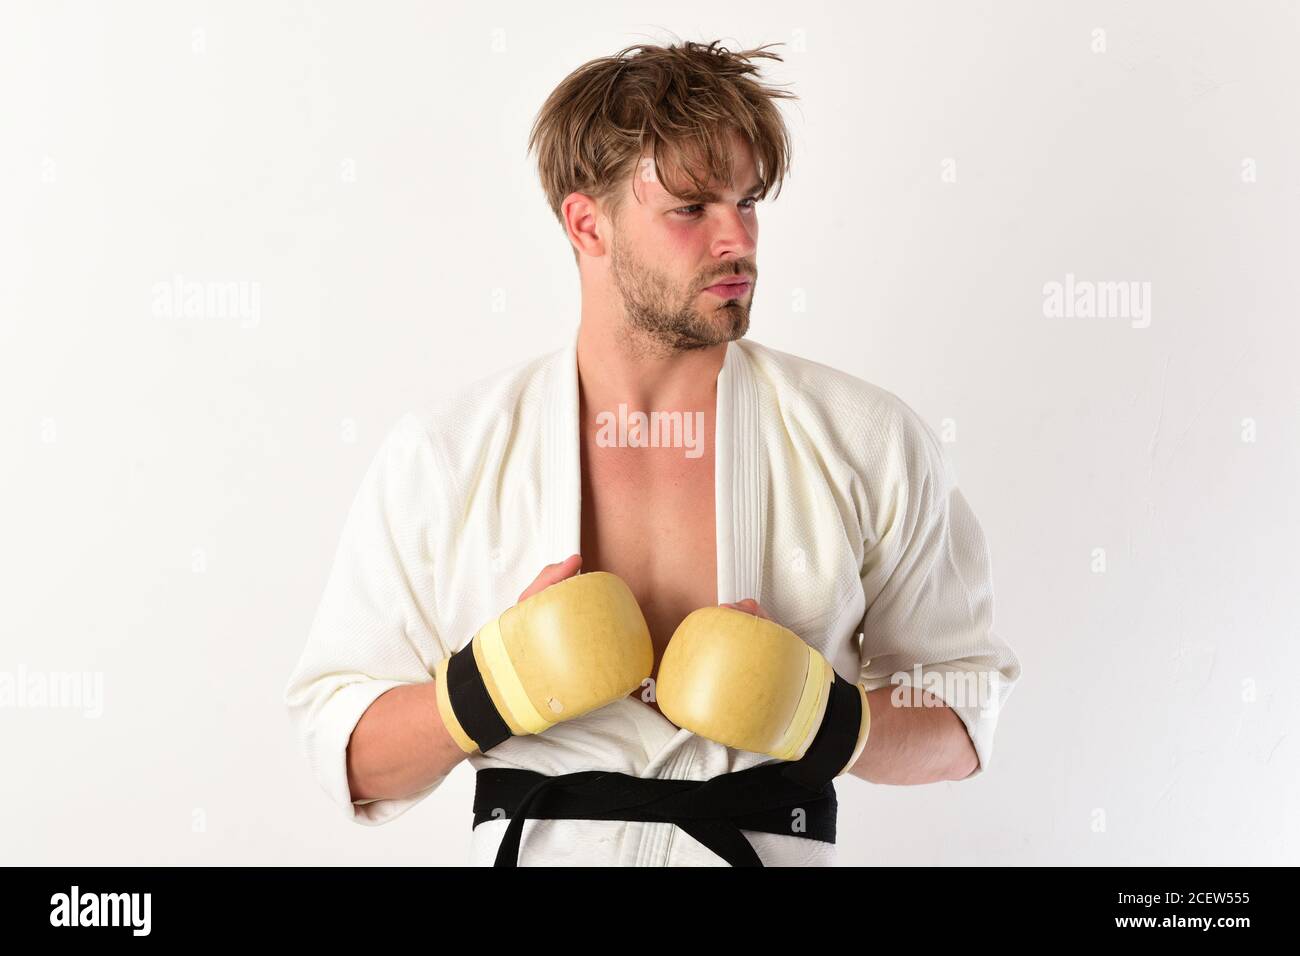 Man with curious face and bristle on white background. MMA fighter with  strong body practices martial